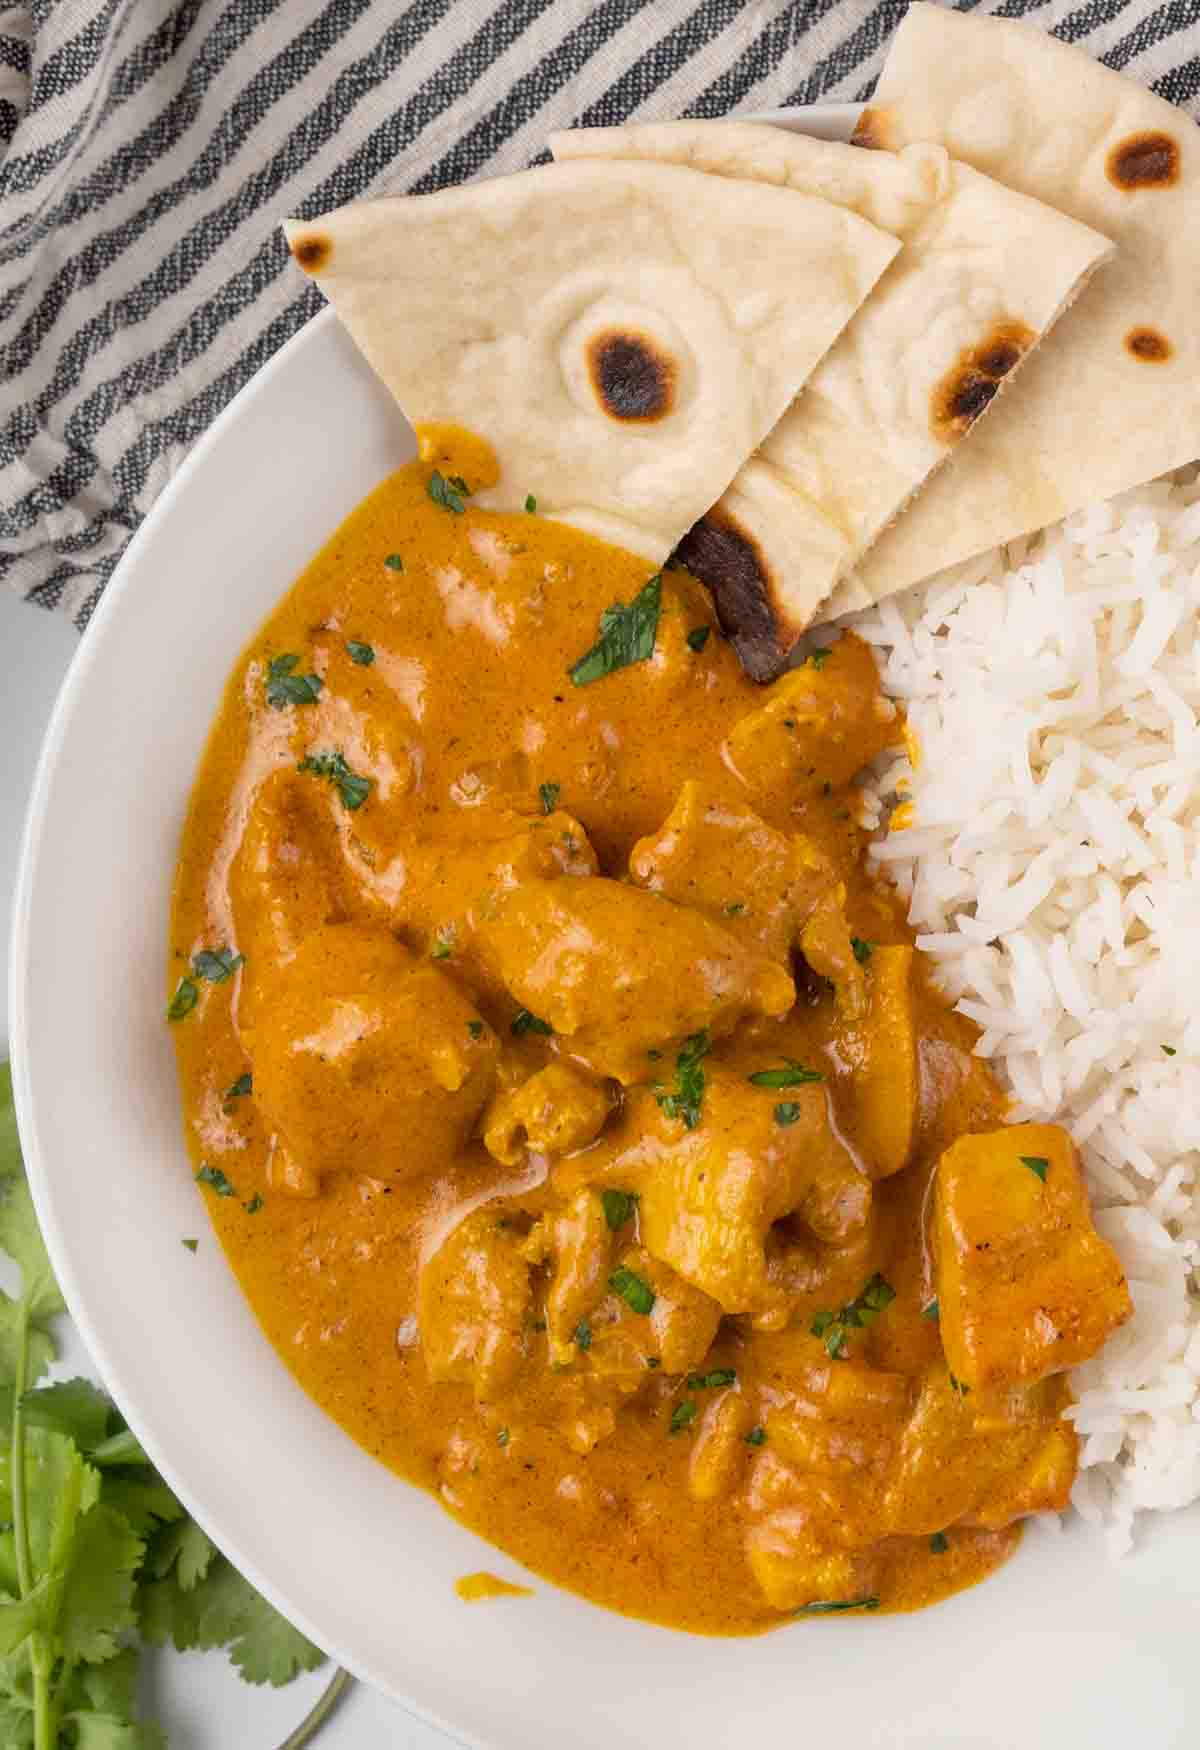 chicken tikka masala with rice and naan bread in a white bowl.